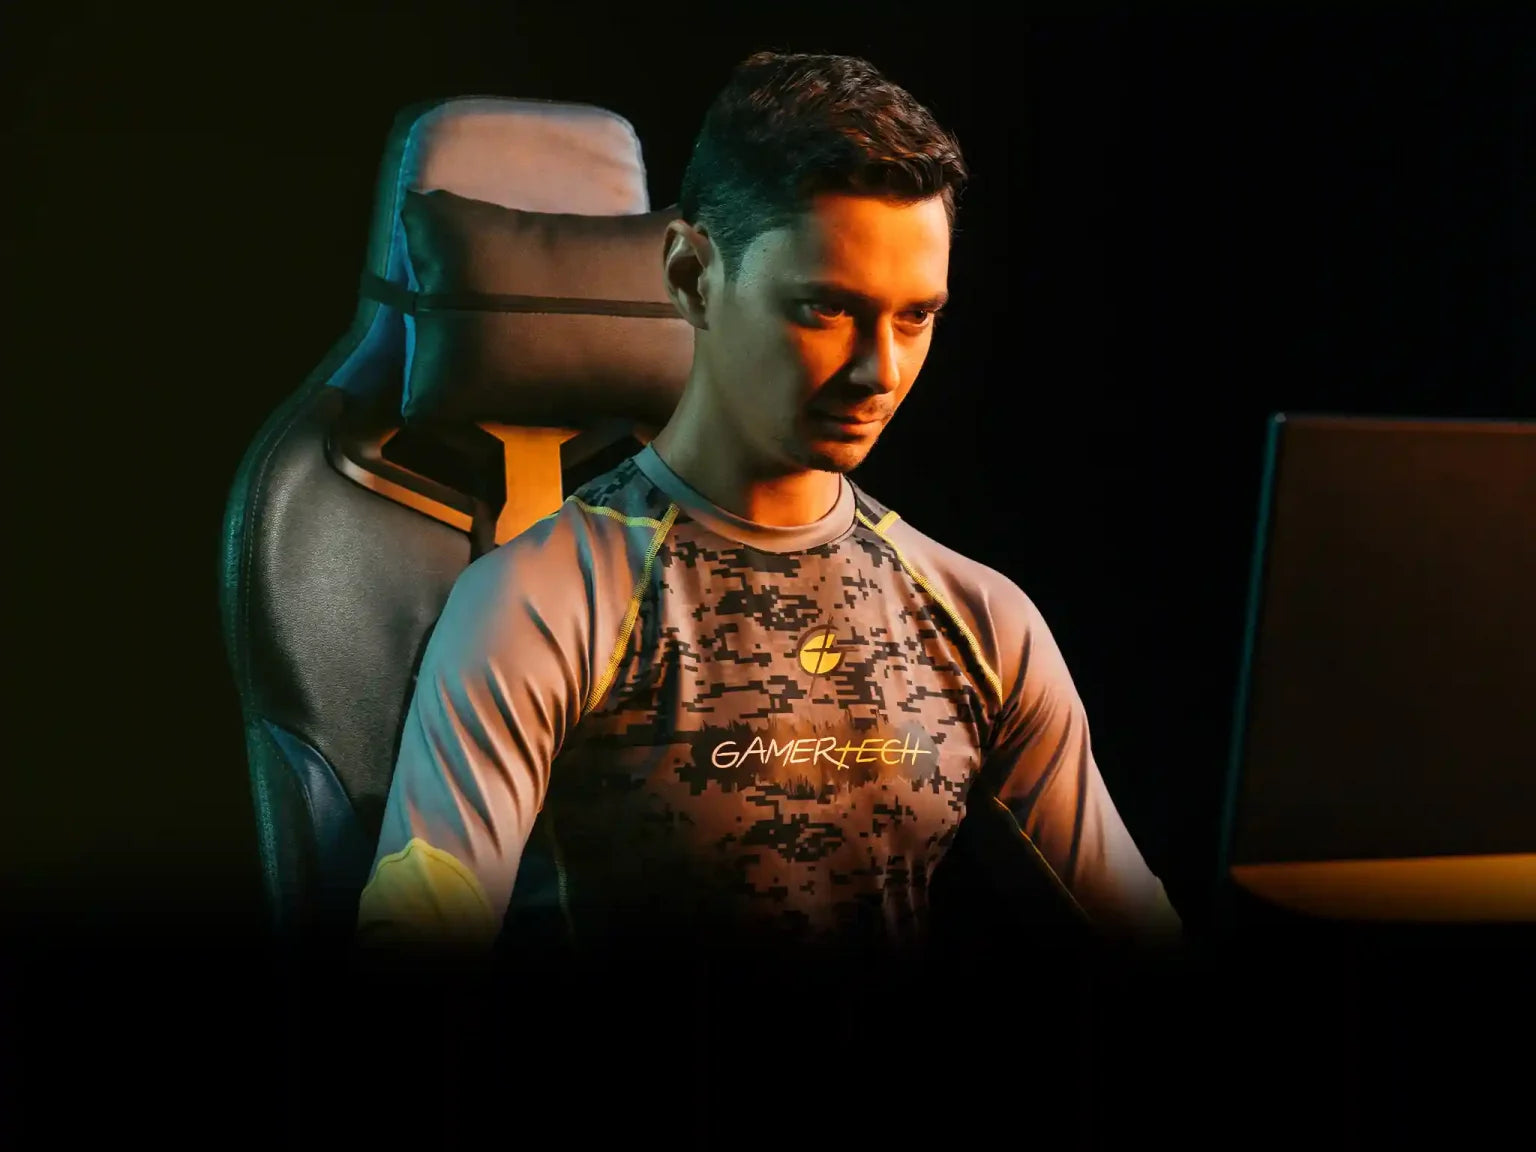 Esports player wearing the GamerTech Pro Jersey looking at a PC